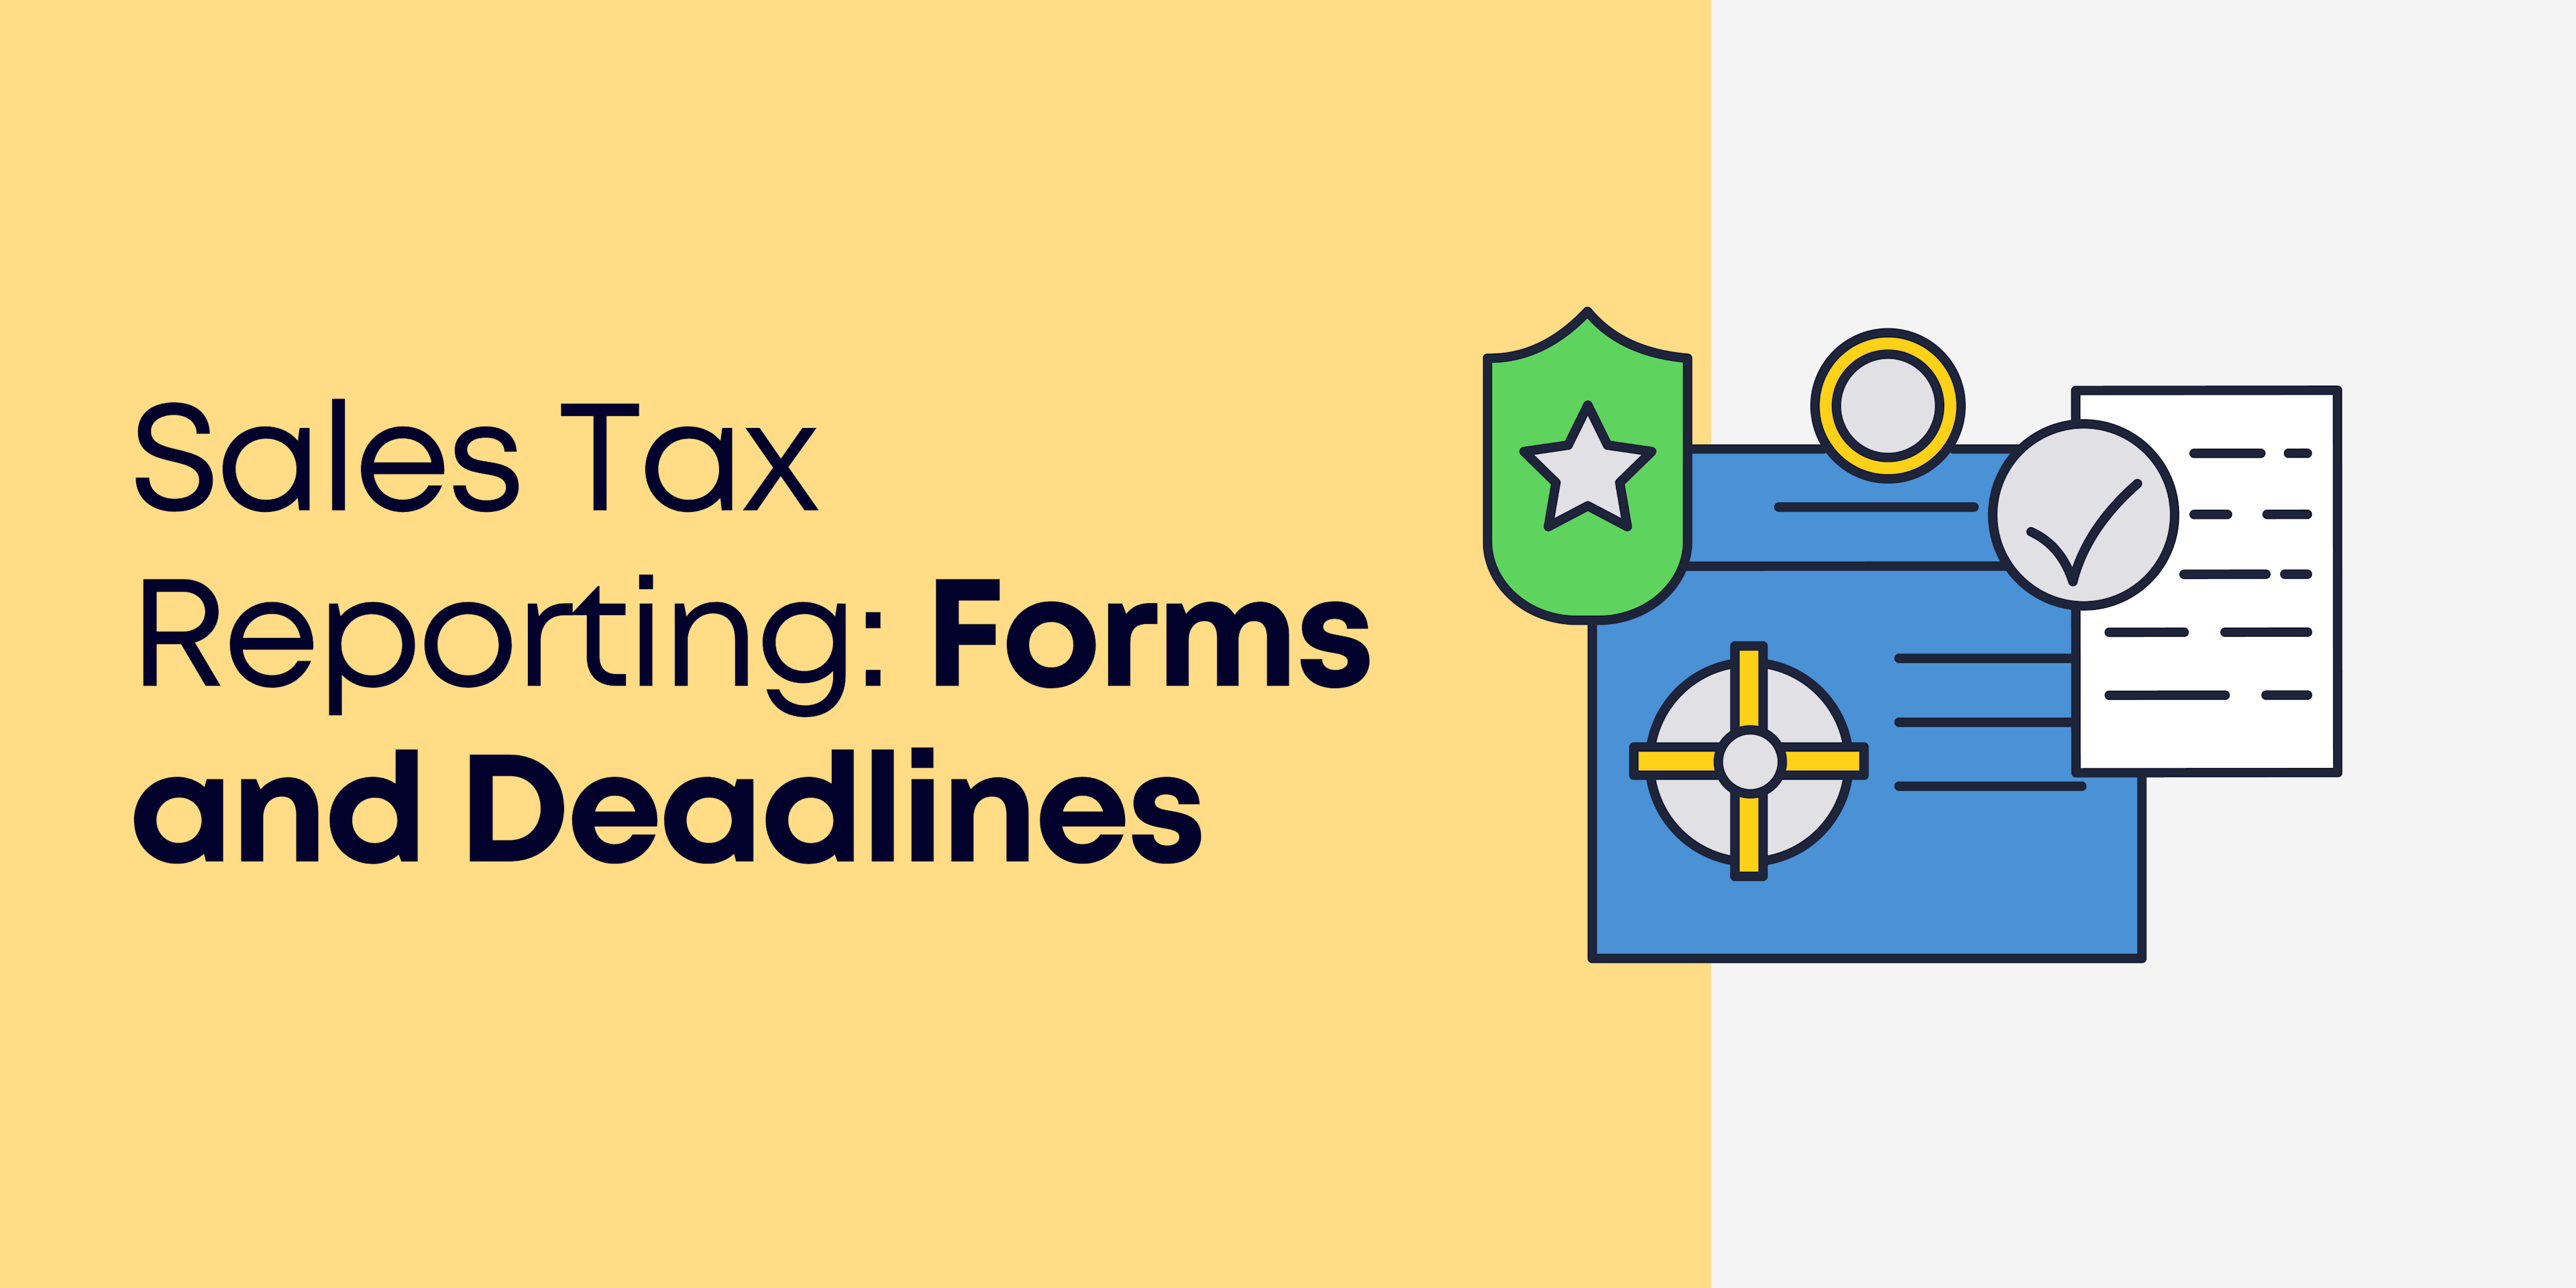 Sales Tax Reporting: Forms and Deadlines